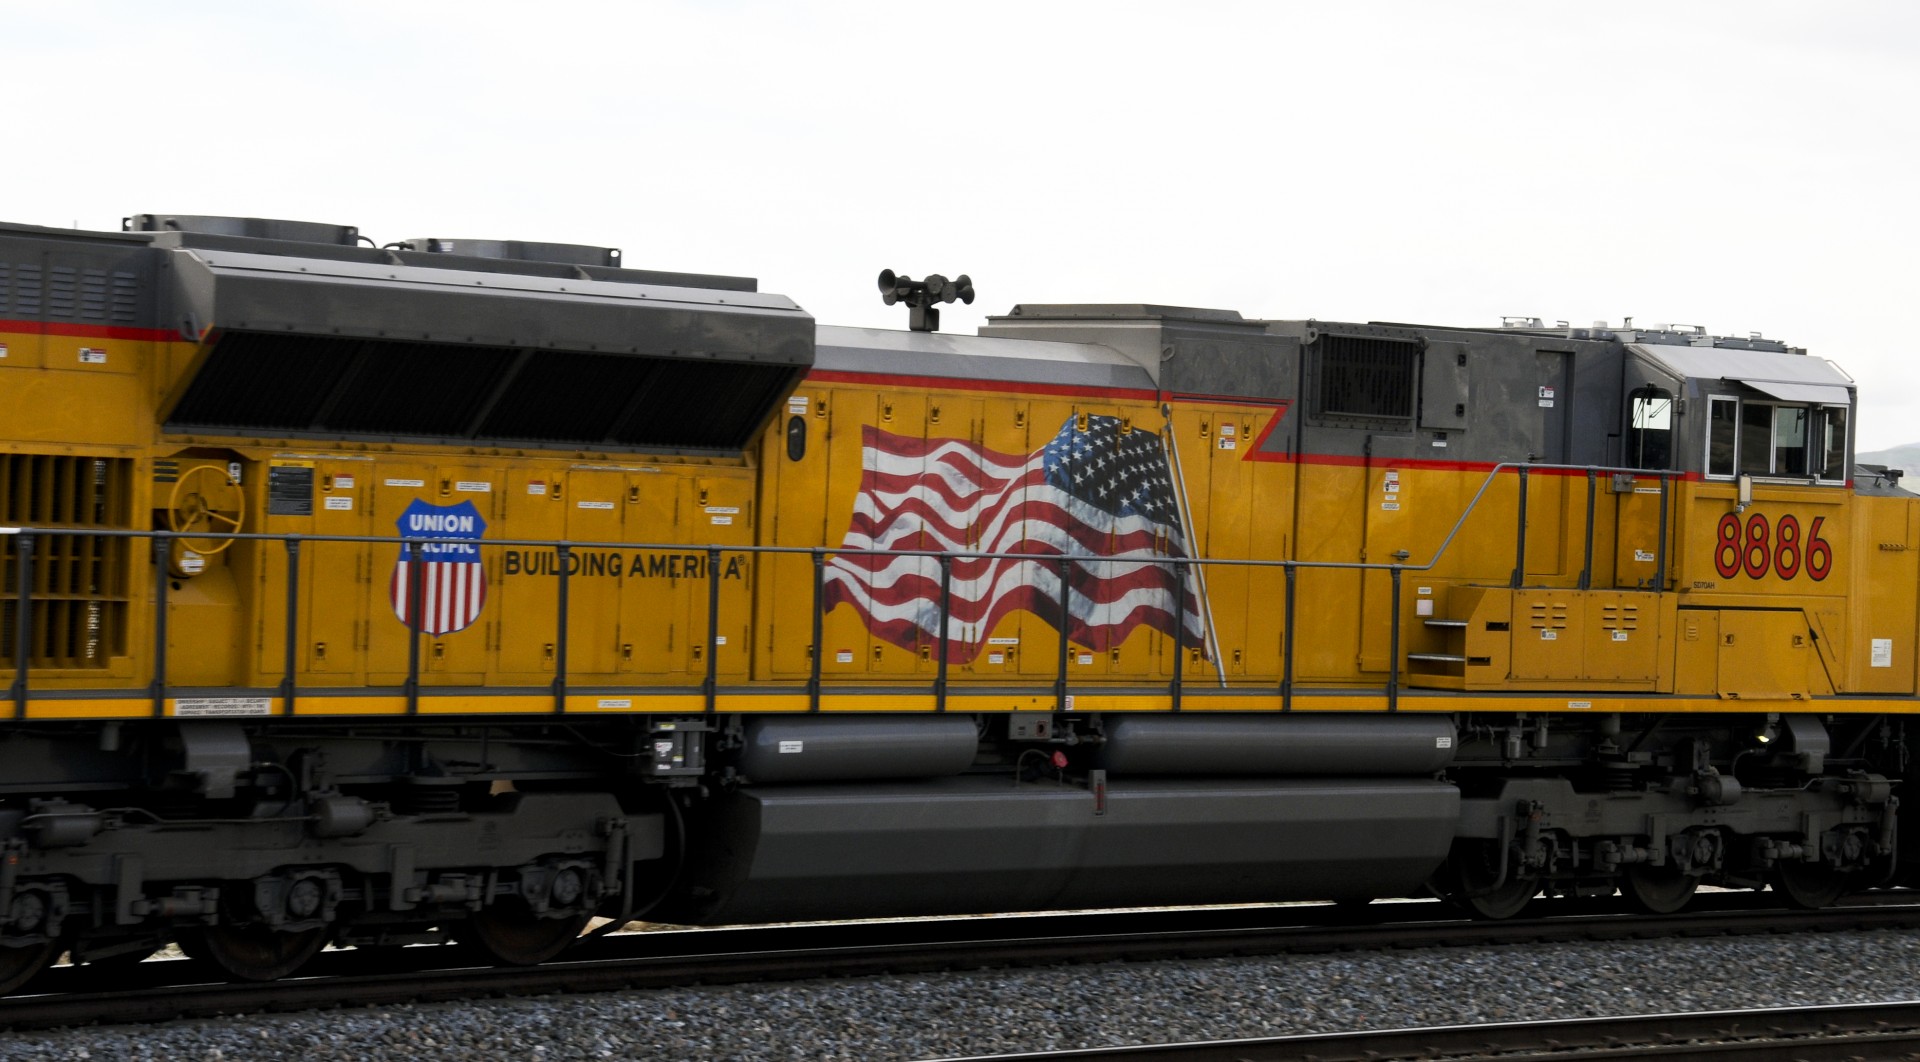 Bright yellow Union Pacific Train car with a proud American Flag painted on it passes through the Palm Springs Desert landscape